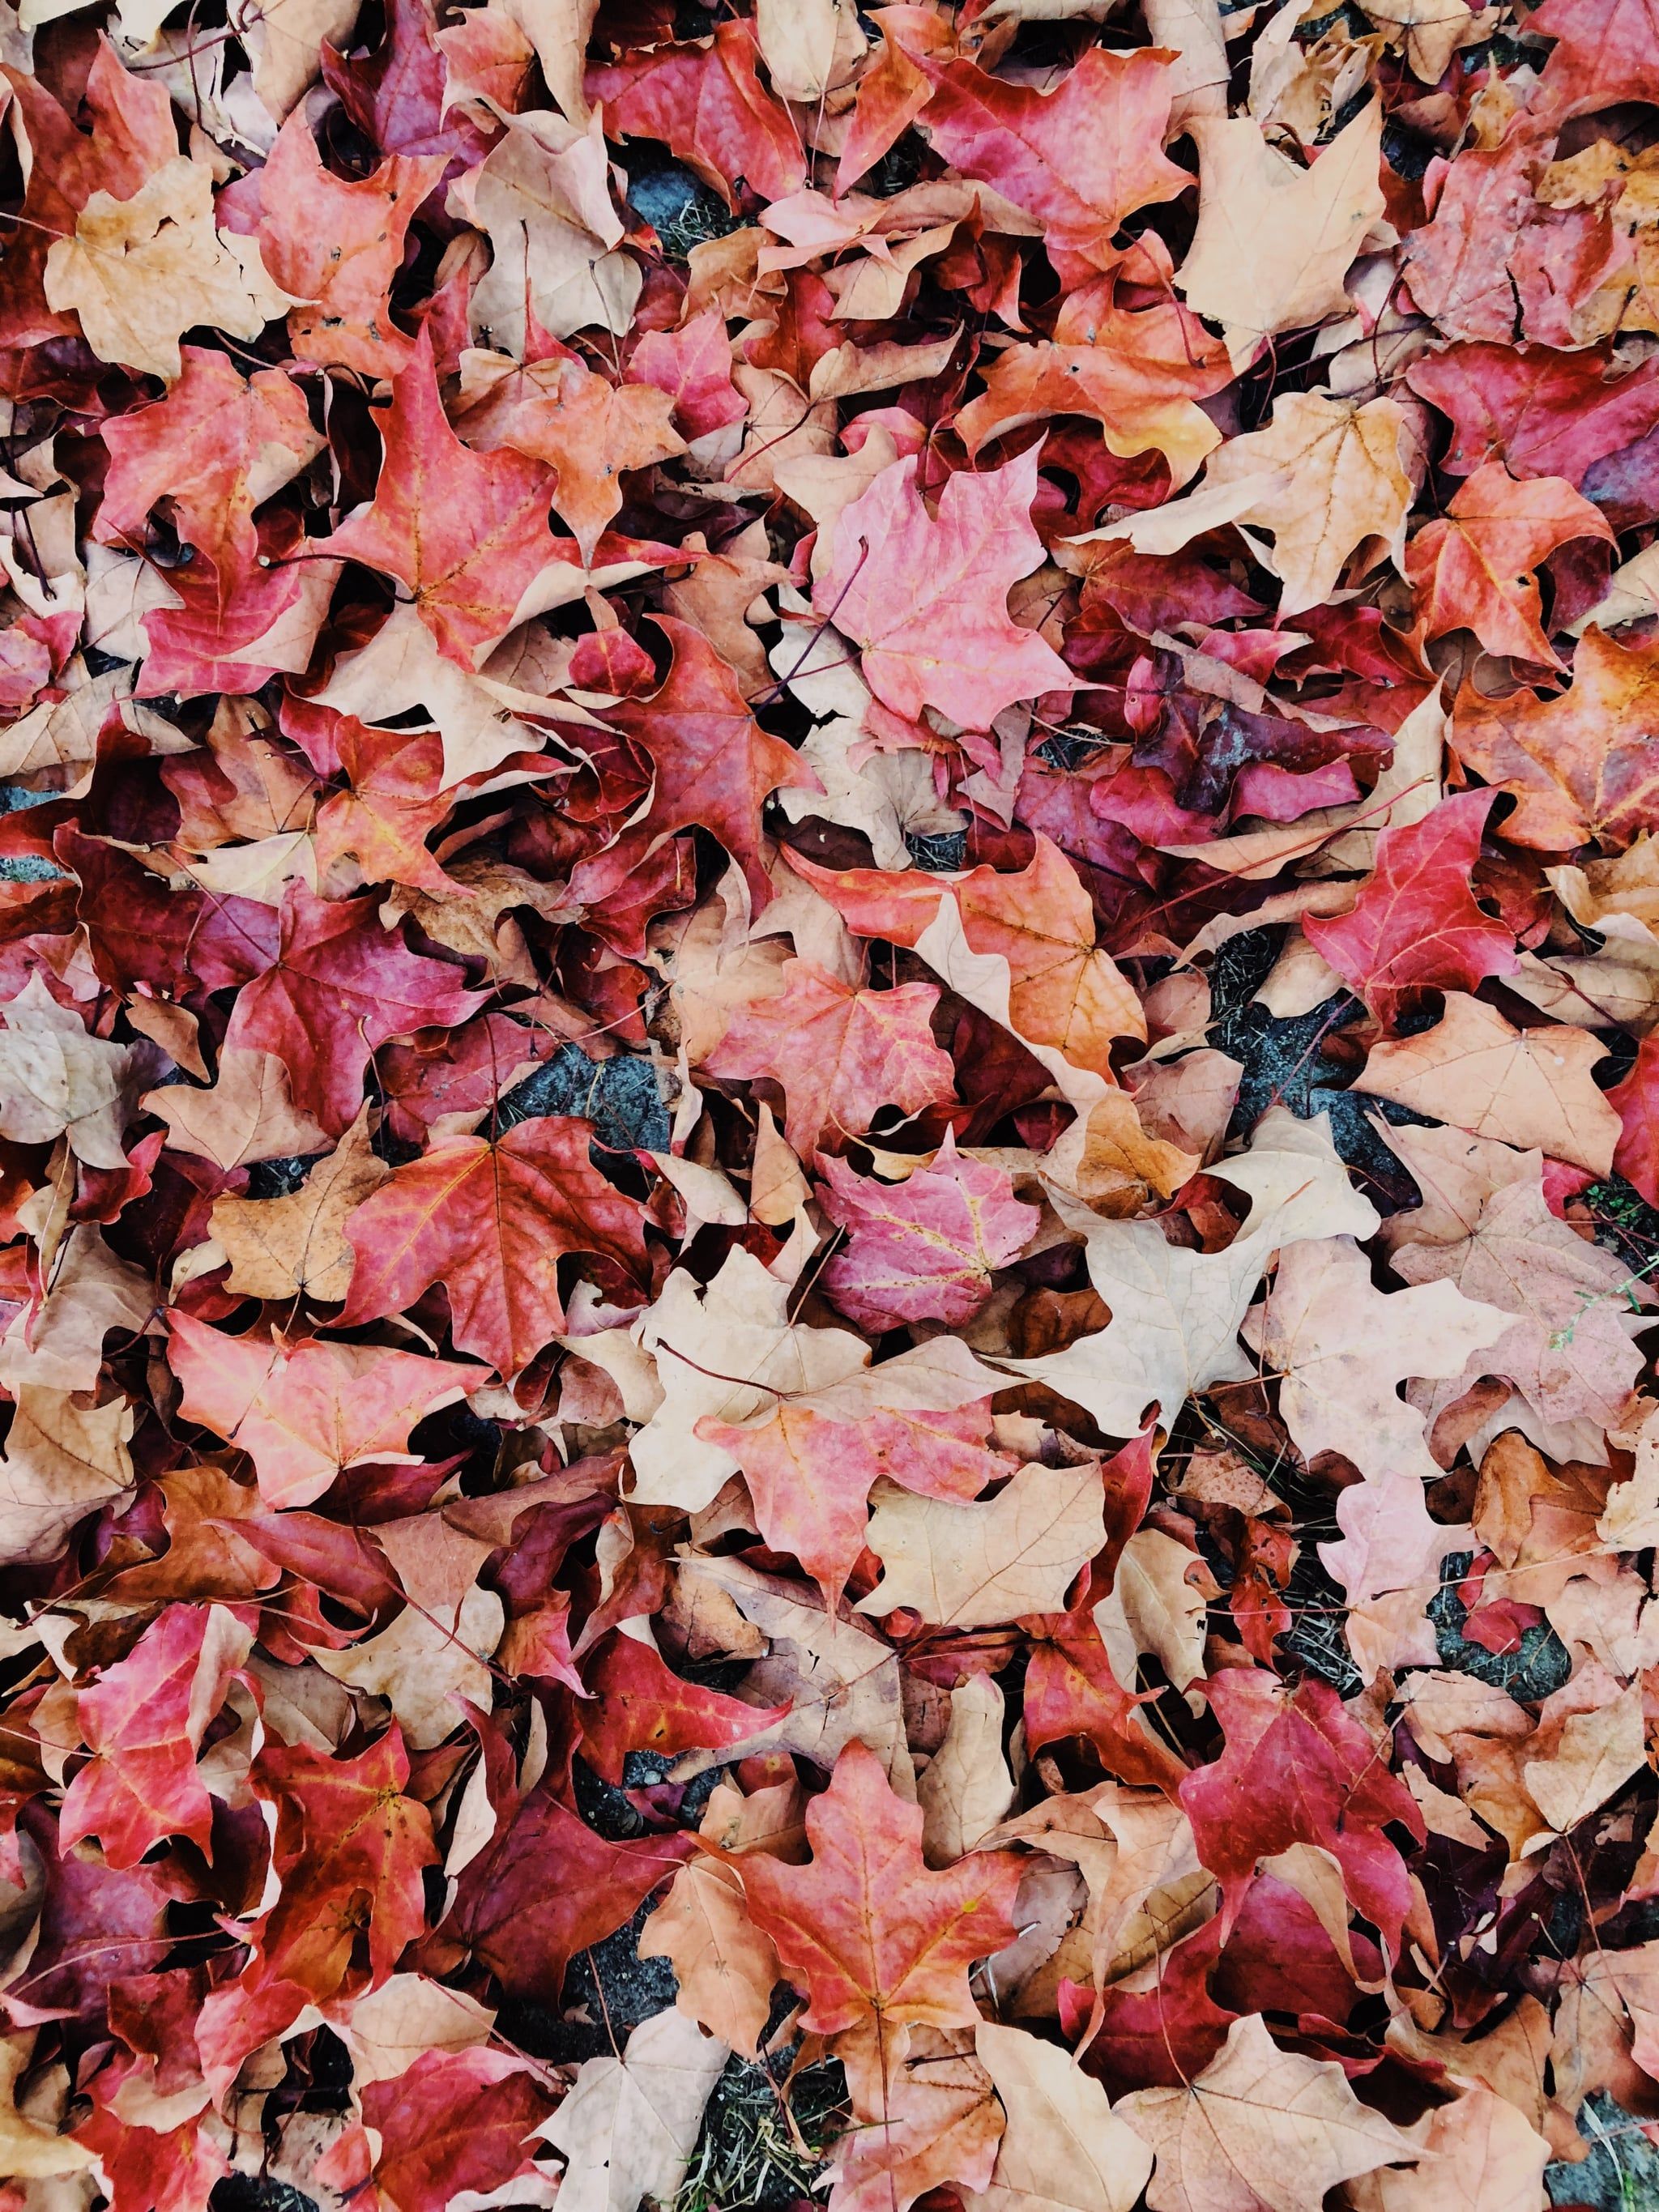 A ground covered in red, orange, and brown leaves. - Fall, leaves